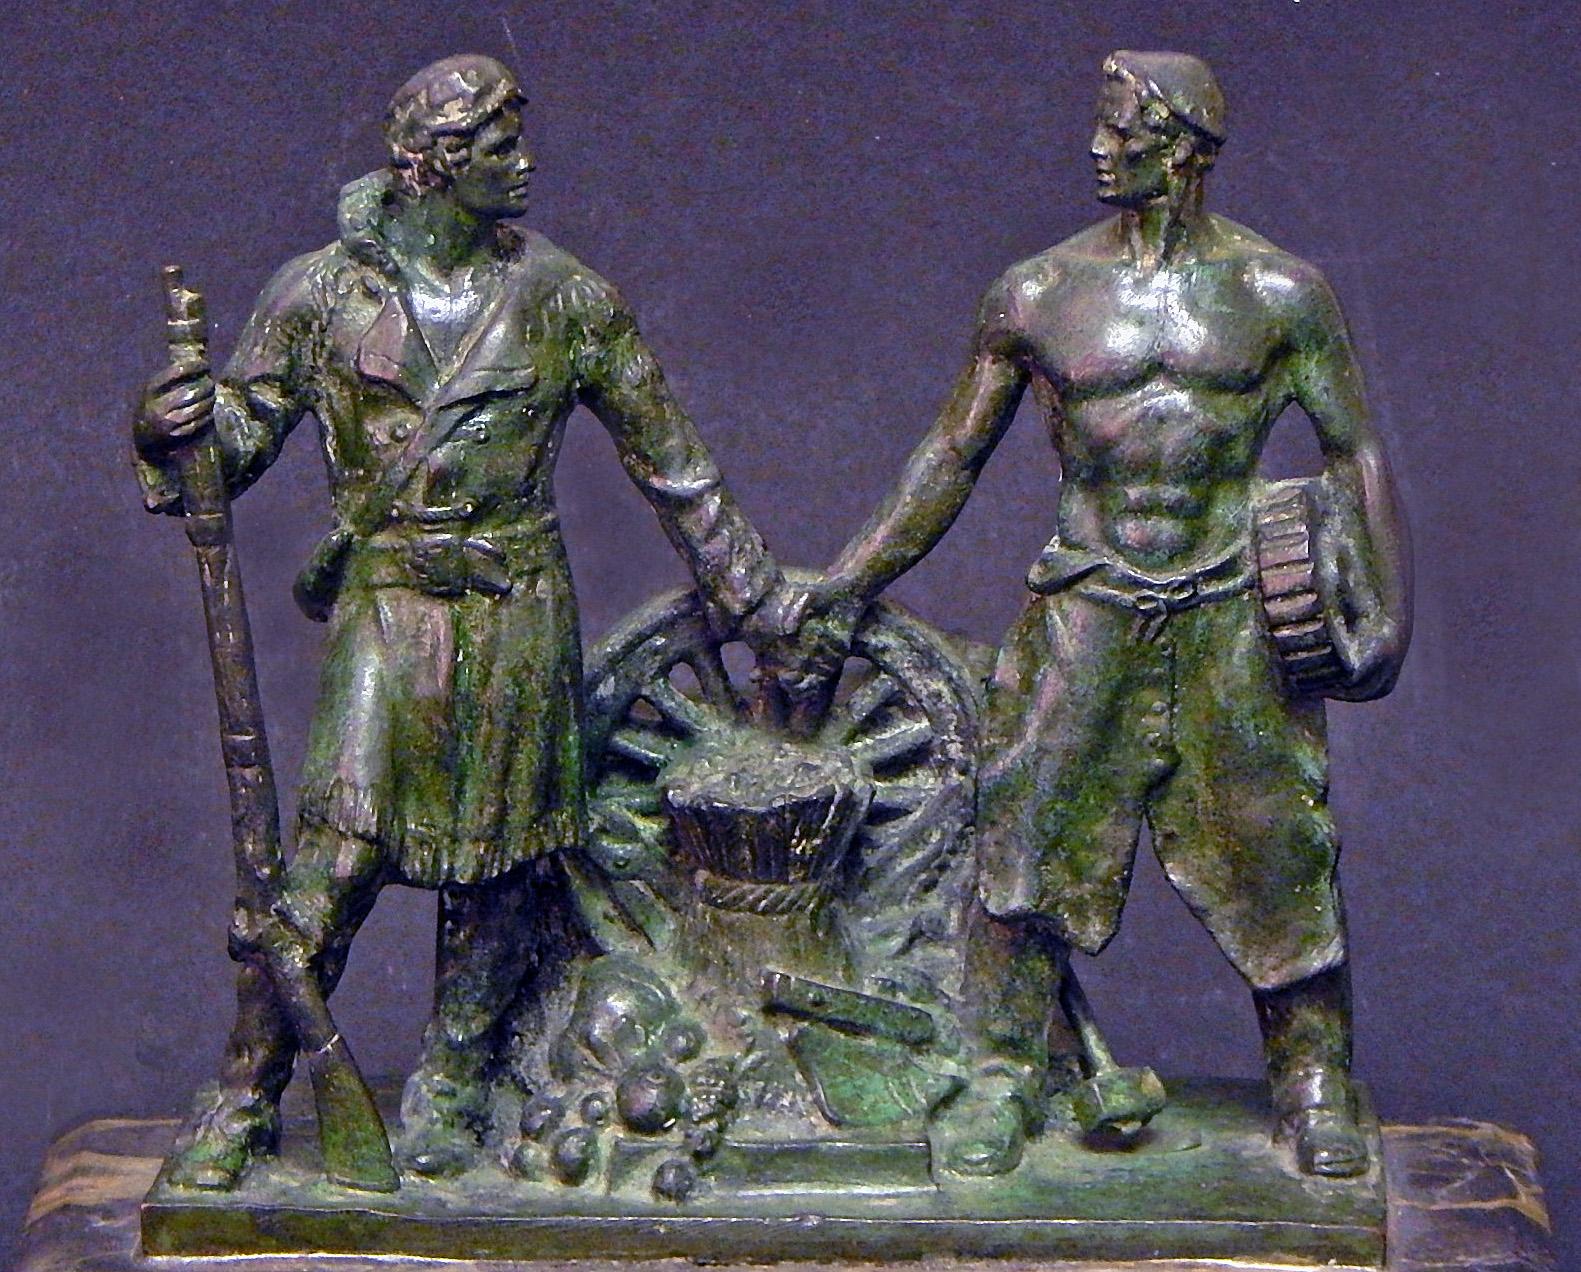 This very fine and rare sculpture depicts two brawny figures -- one a half-nude worker with a gear in his hand, and the other a buckskin-clothed Pioneer with a rifle in his hand and an abundance of produce at his feet -- reaching out to clasp hands